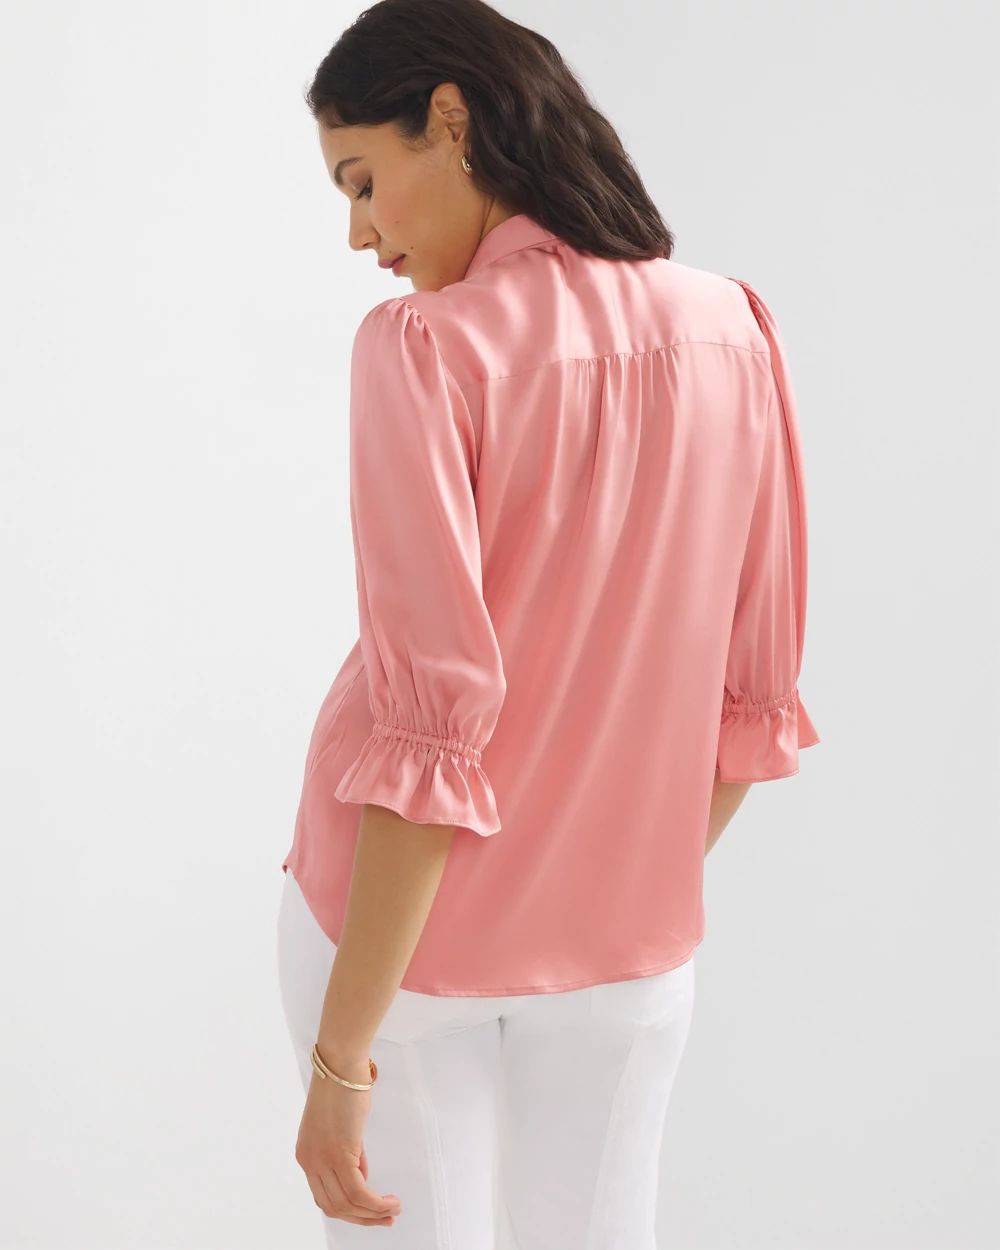 Petite Elbow Sleeve Satin Button Shirt click to view larger image.